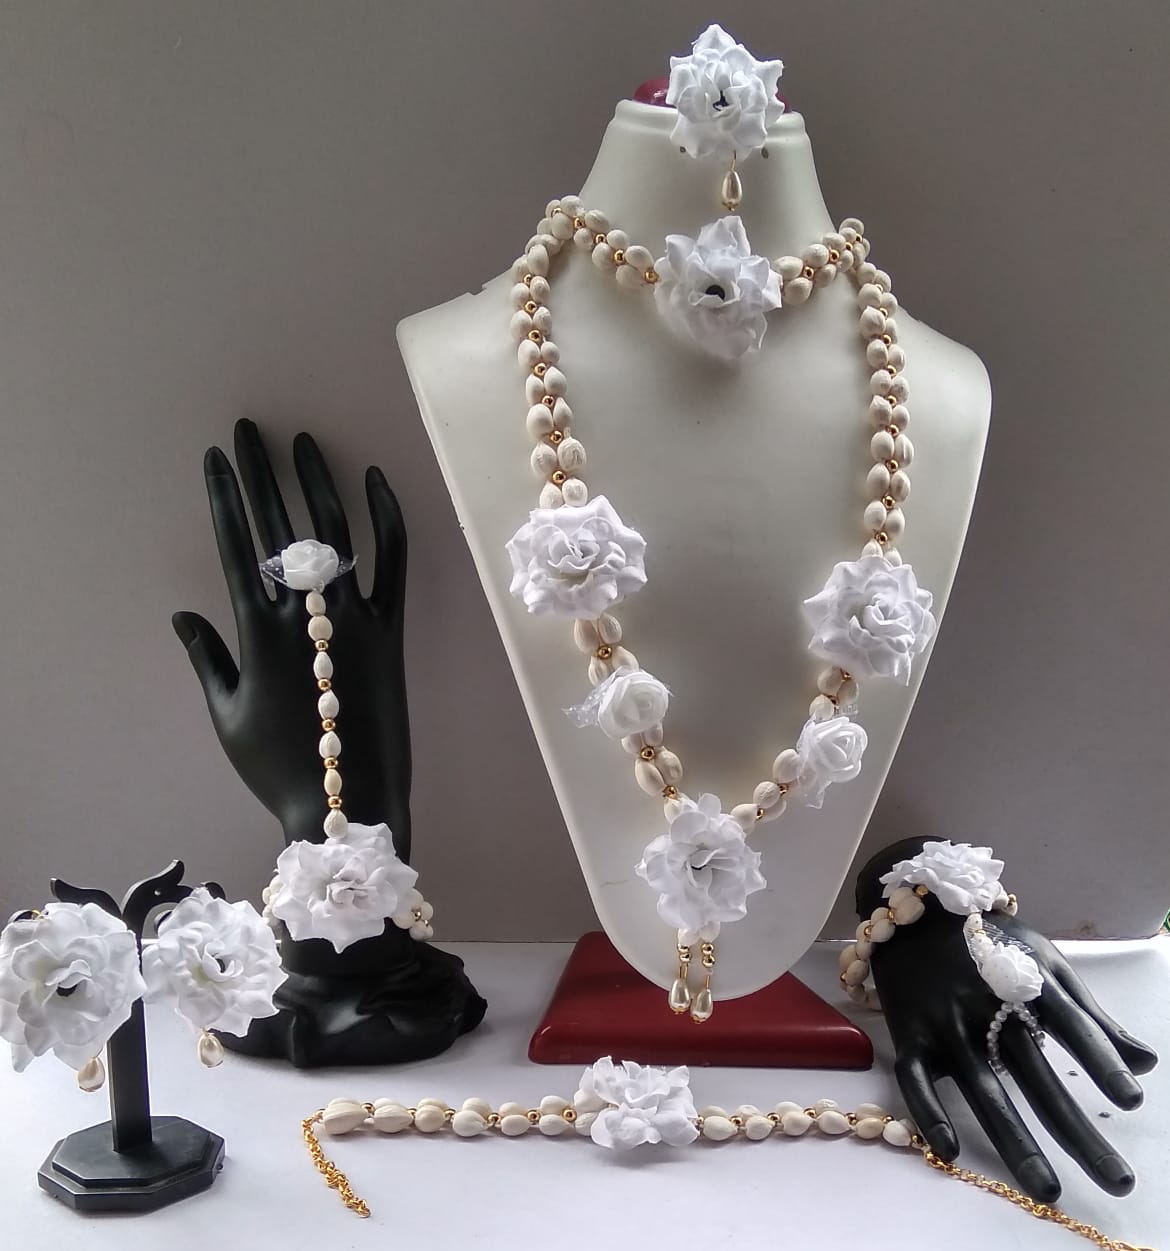 Anekaant Black & White Floral Paper Quilling Necklace with Earrings